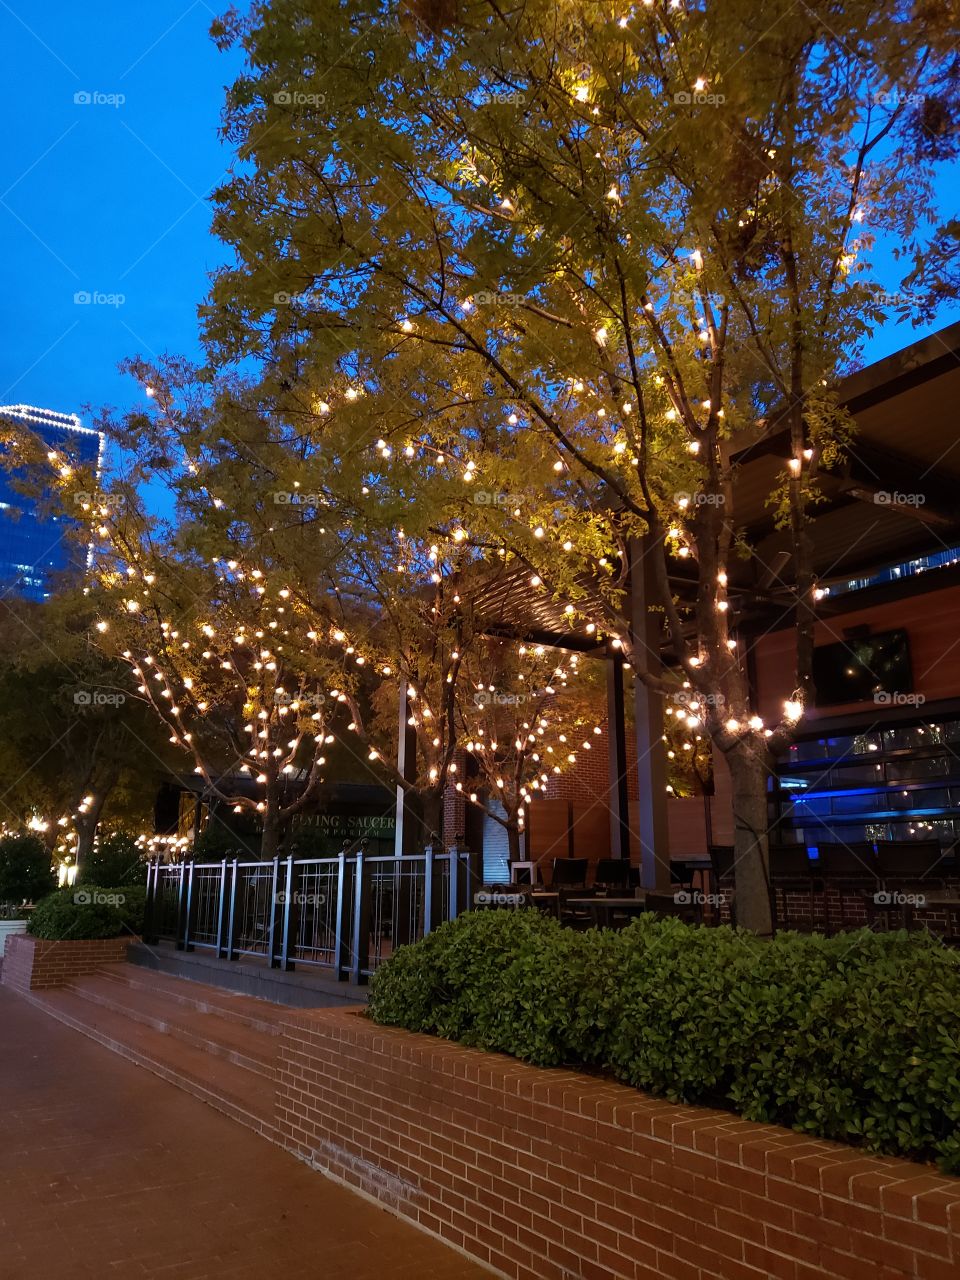 Downtown Fort Worth, Texas at Christmas